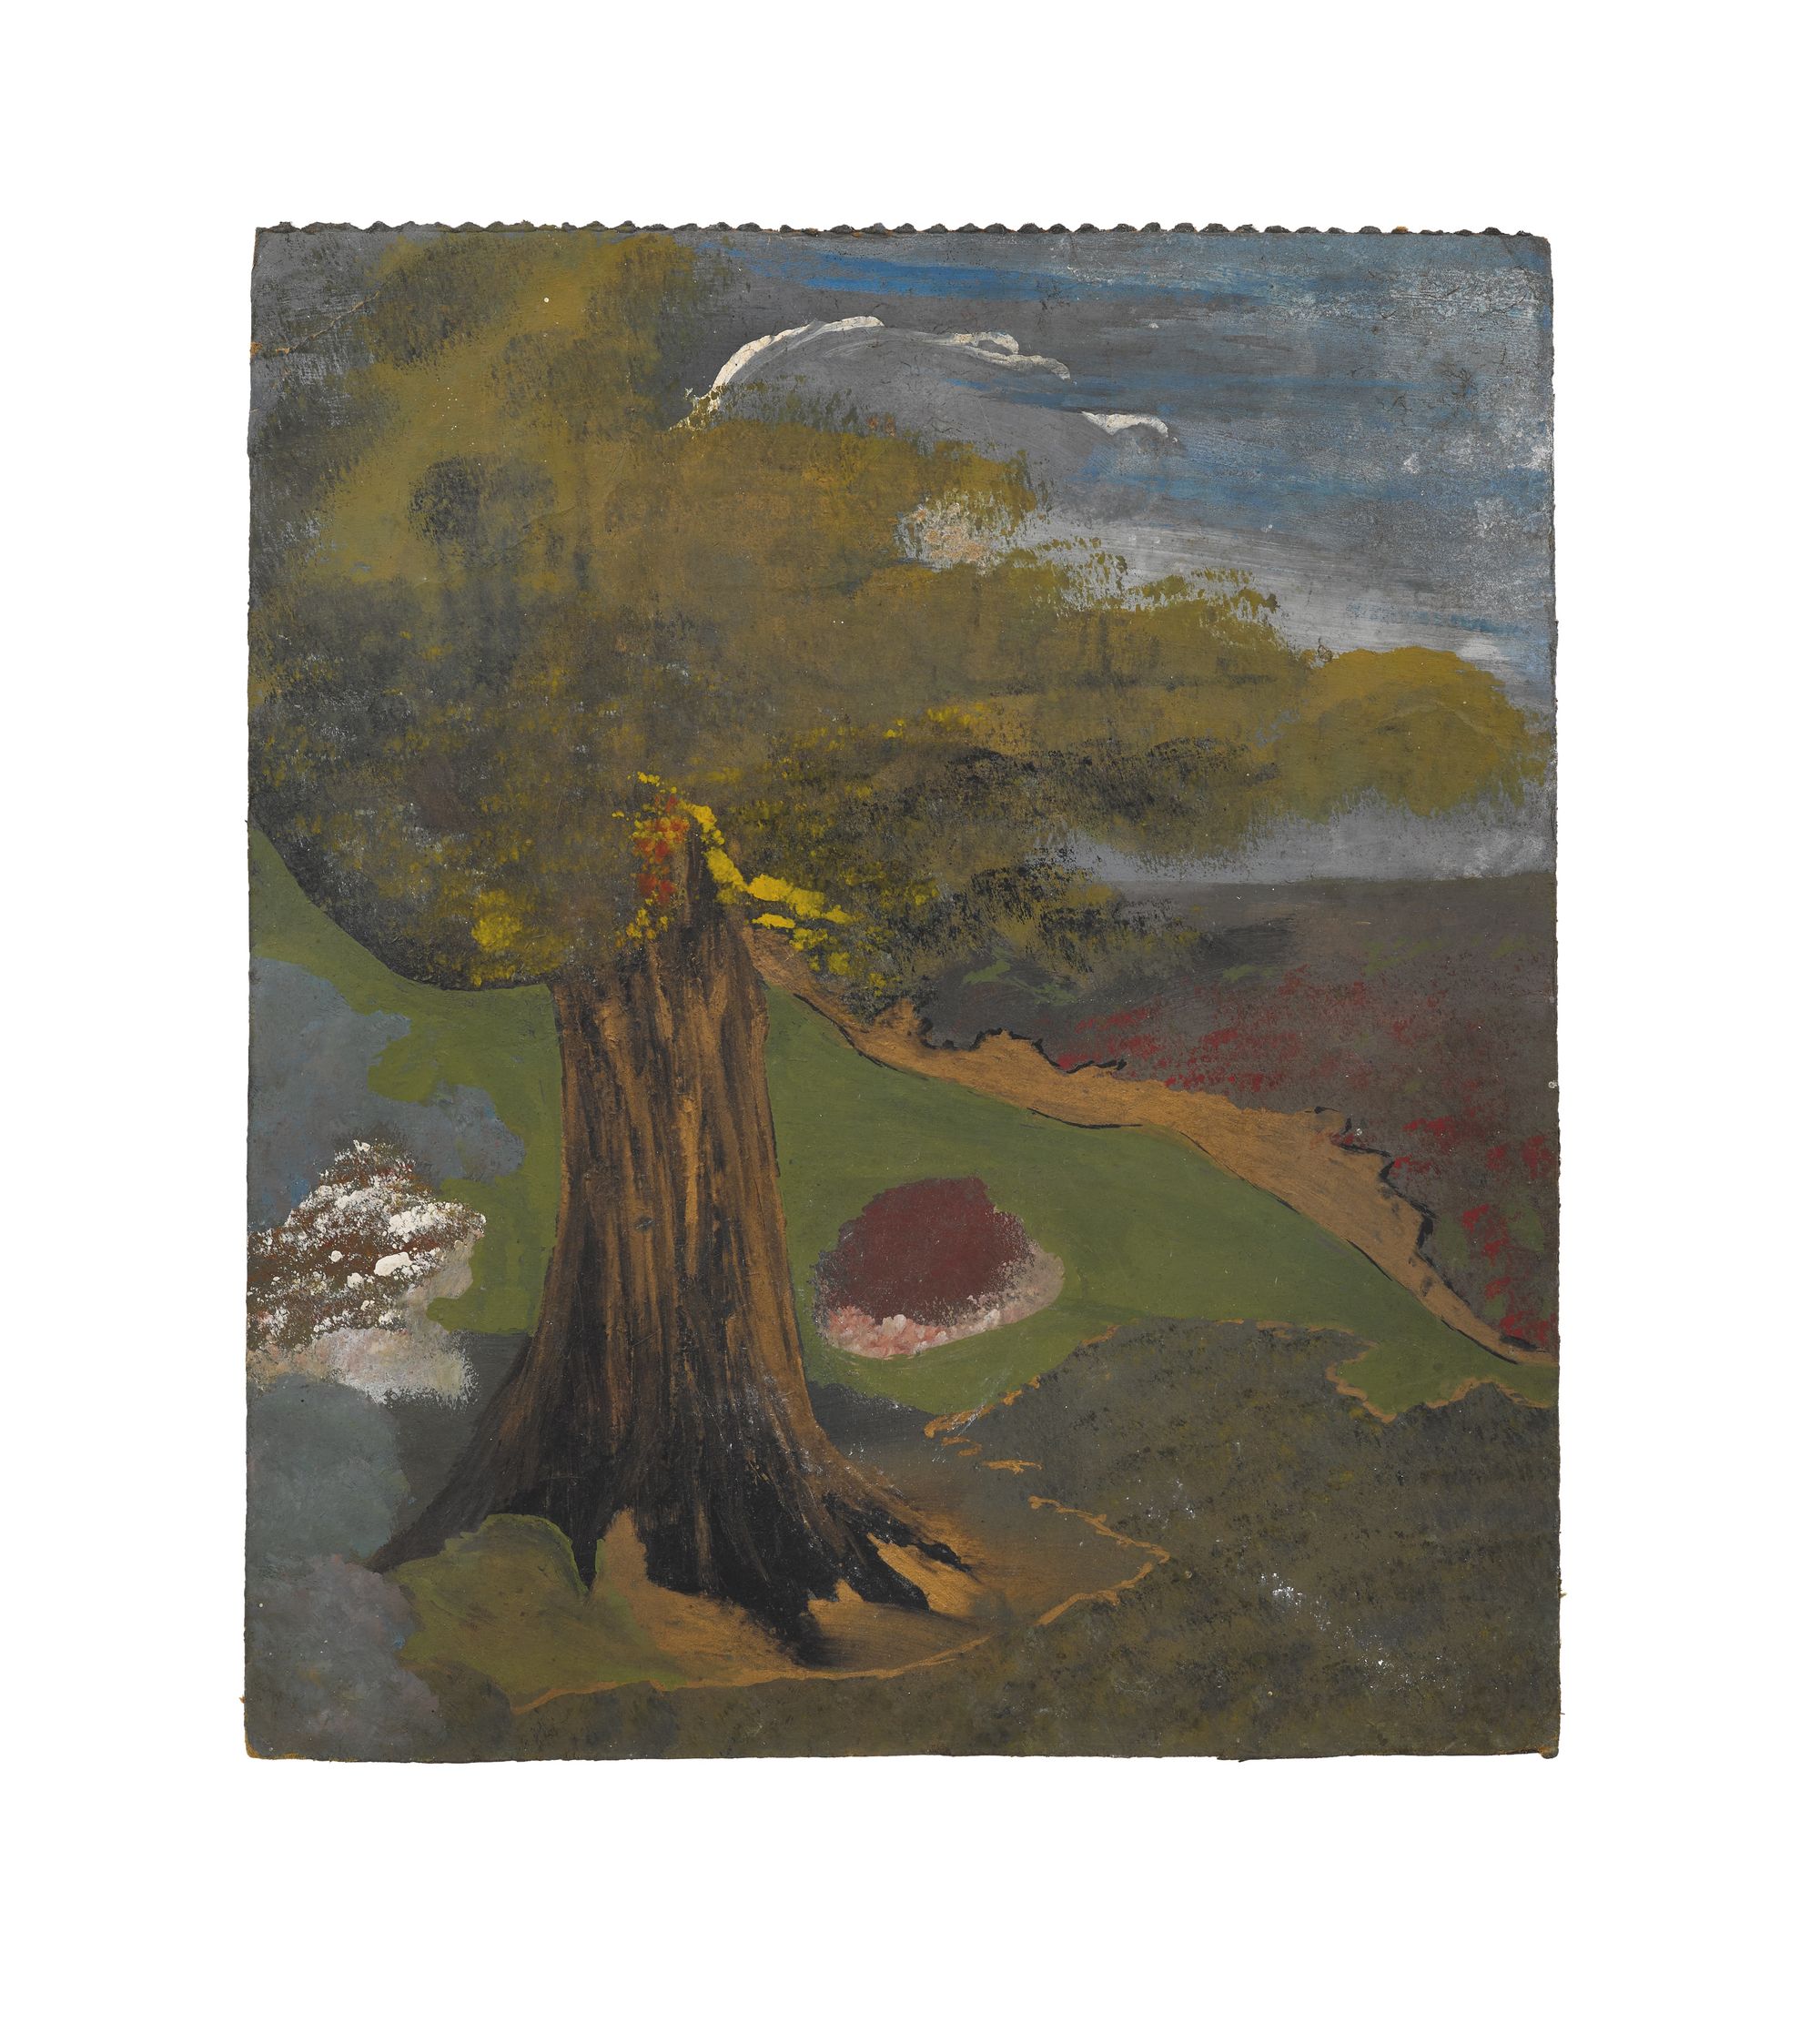 A soft landscape painting wherein a tree, viewed from above, intersects with a grassy hill.